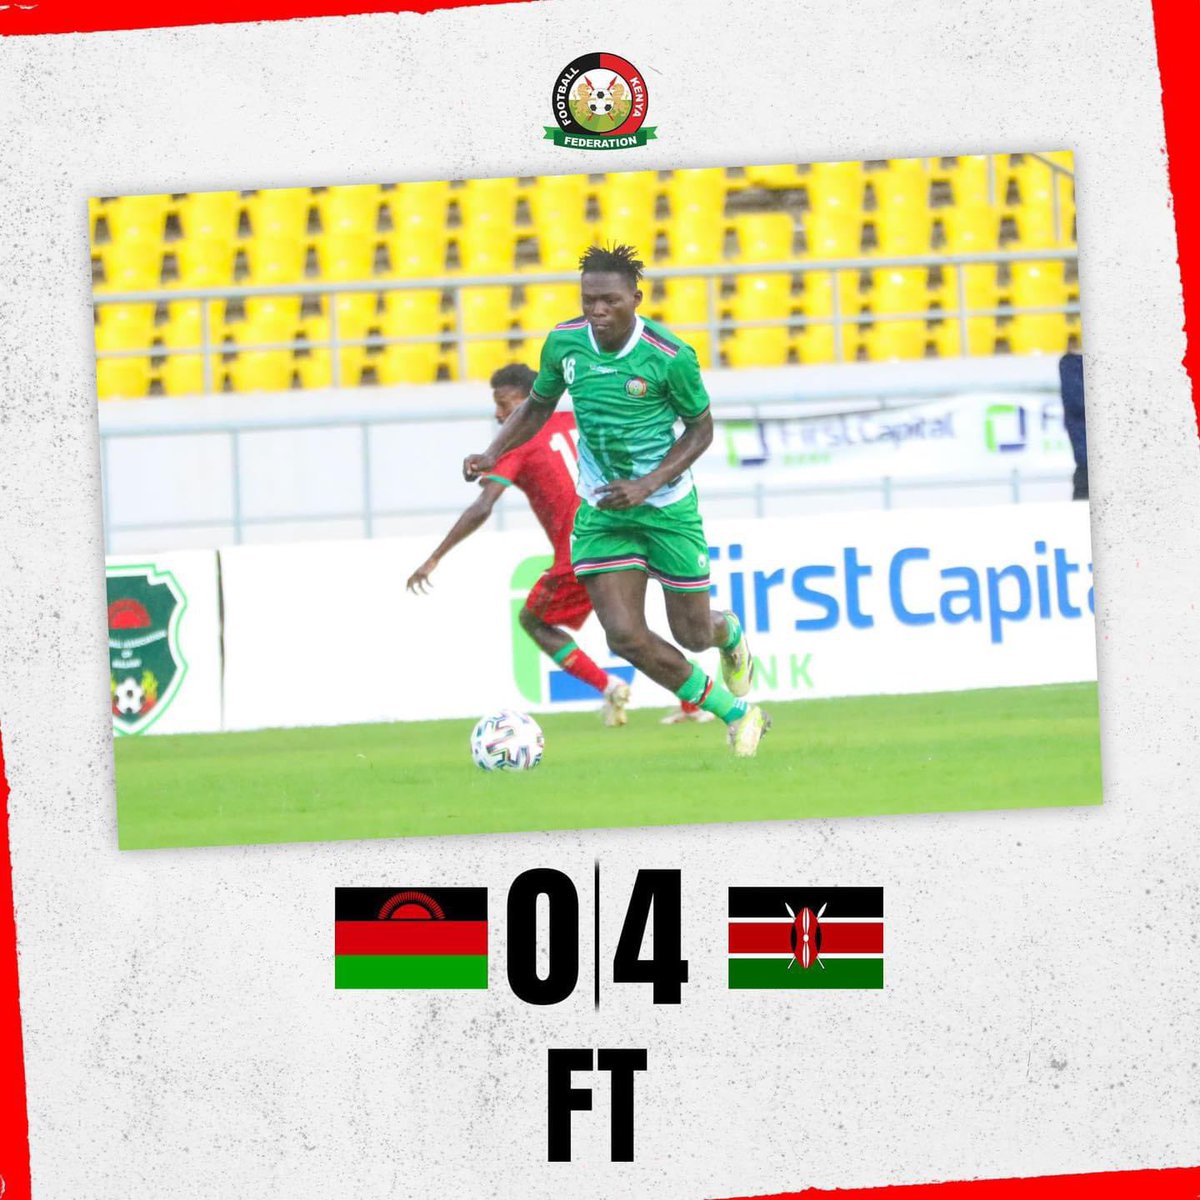 🇰🇪 What an incredible display by @HarambeeStars_ , dominating Malawi 4-0 on their home turf! Your stylish performance has made Kenya proud. Thank you for representing our nation with such skill and swag! #HarambeeStars